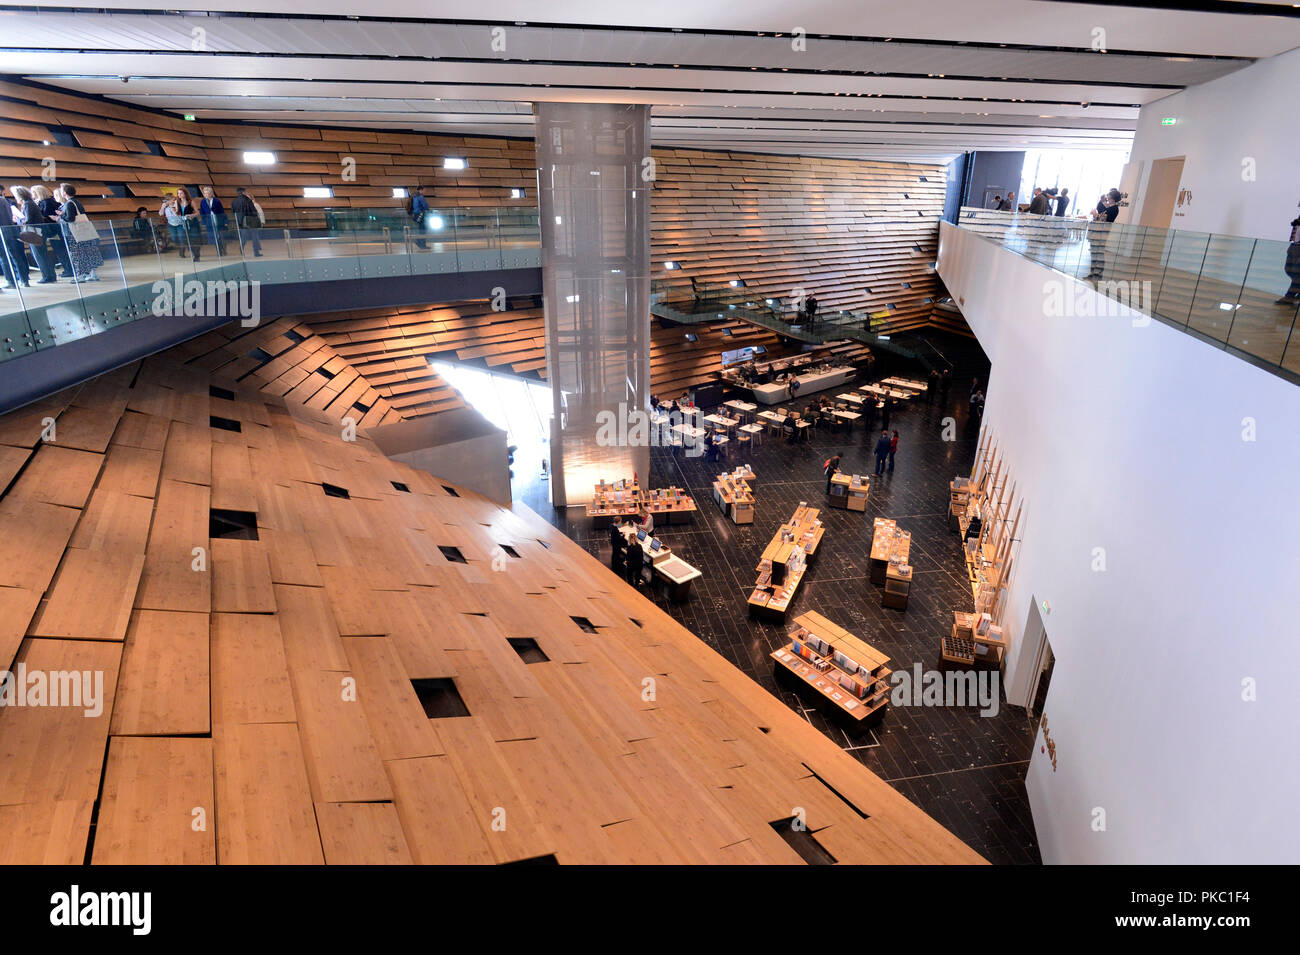 Dundee, Scotland, United Kingdom, 12, September, 2018. The interior of the new V & A Dundee museum is revealed for the first time at a press preview event ahead of the grand opening on Saturday, September 15, 2018. © Ken Jack / Alamy Live News Stock Photo